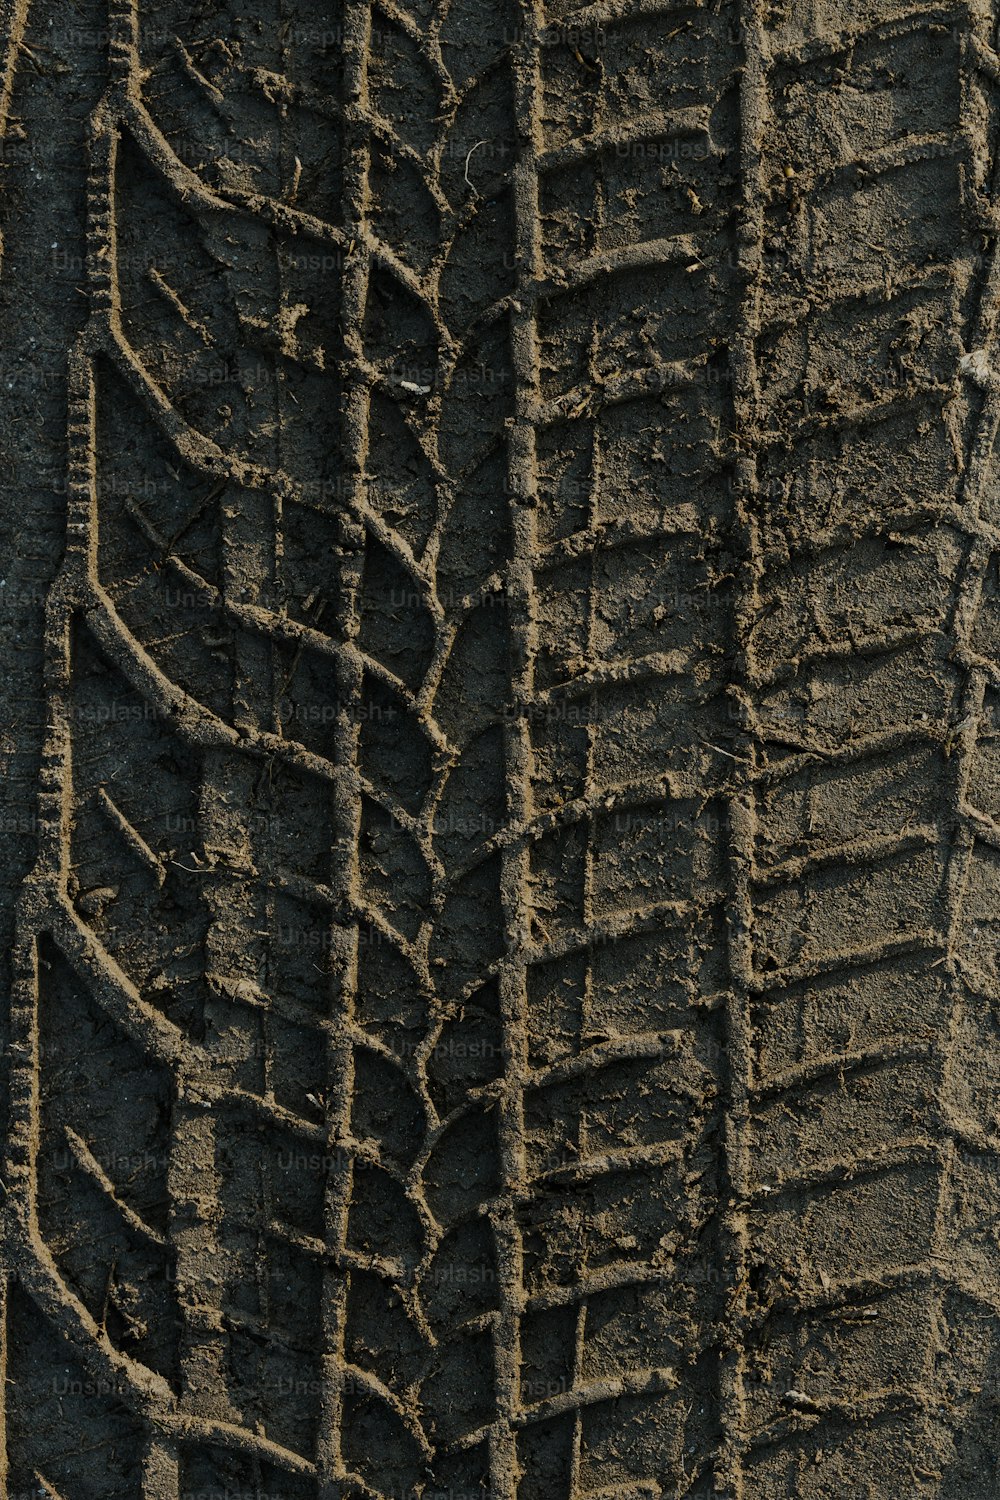 a close up of a tire on a dirt road